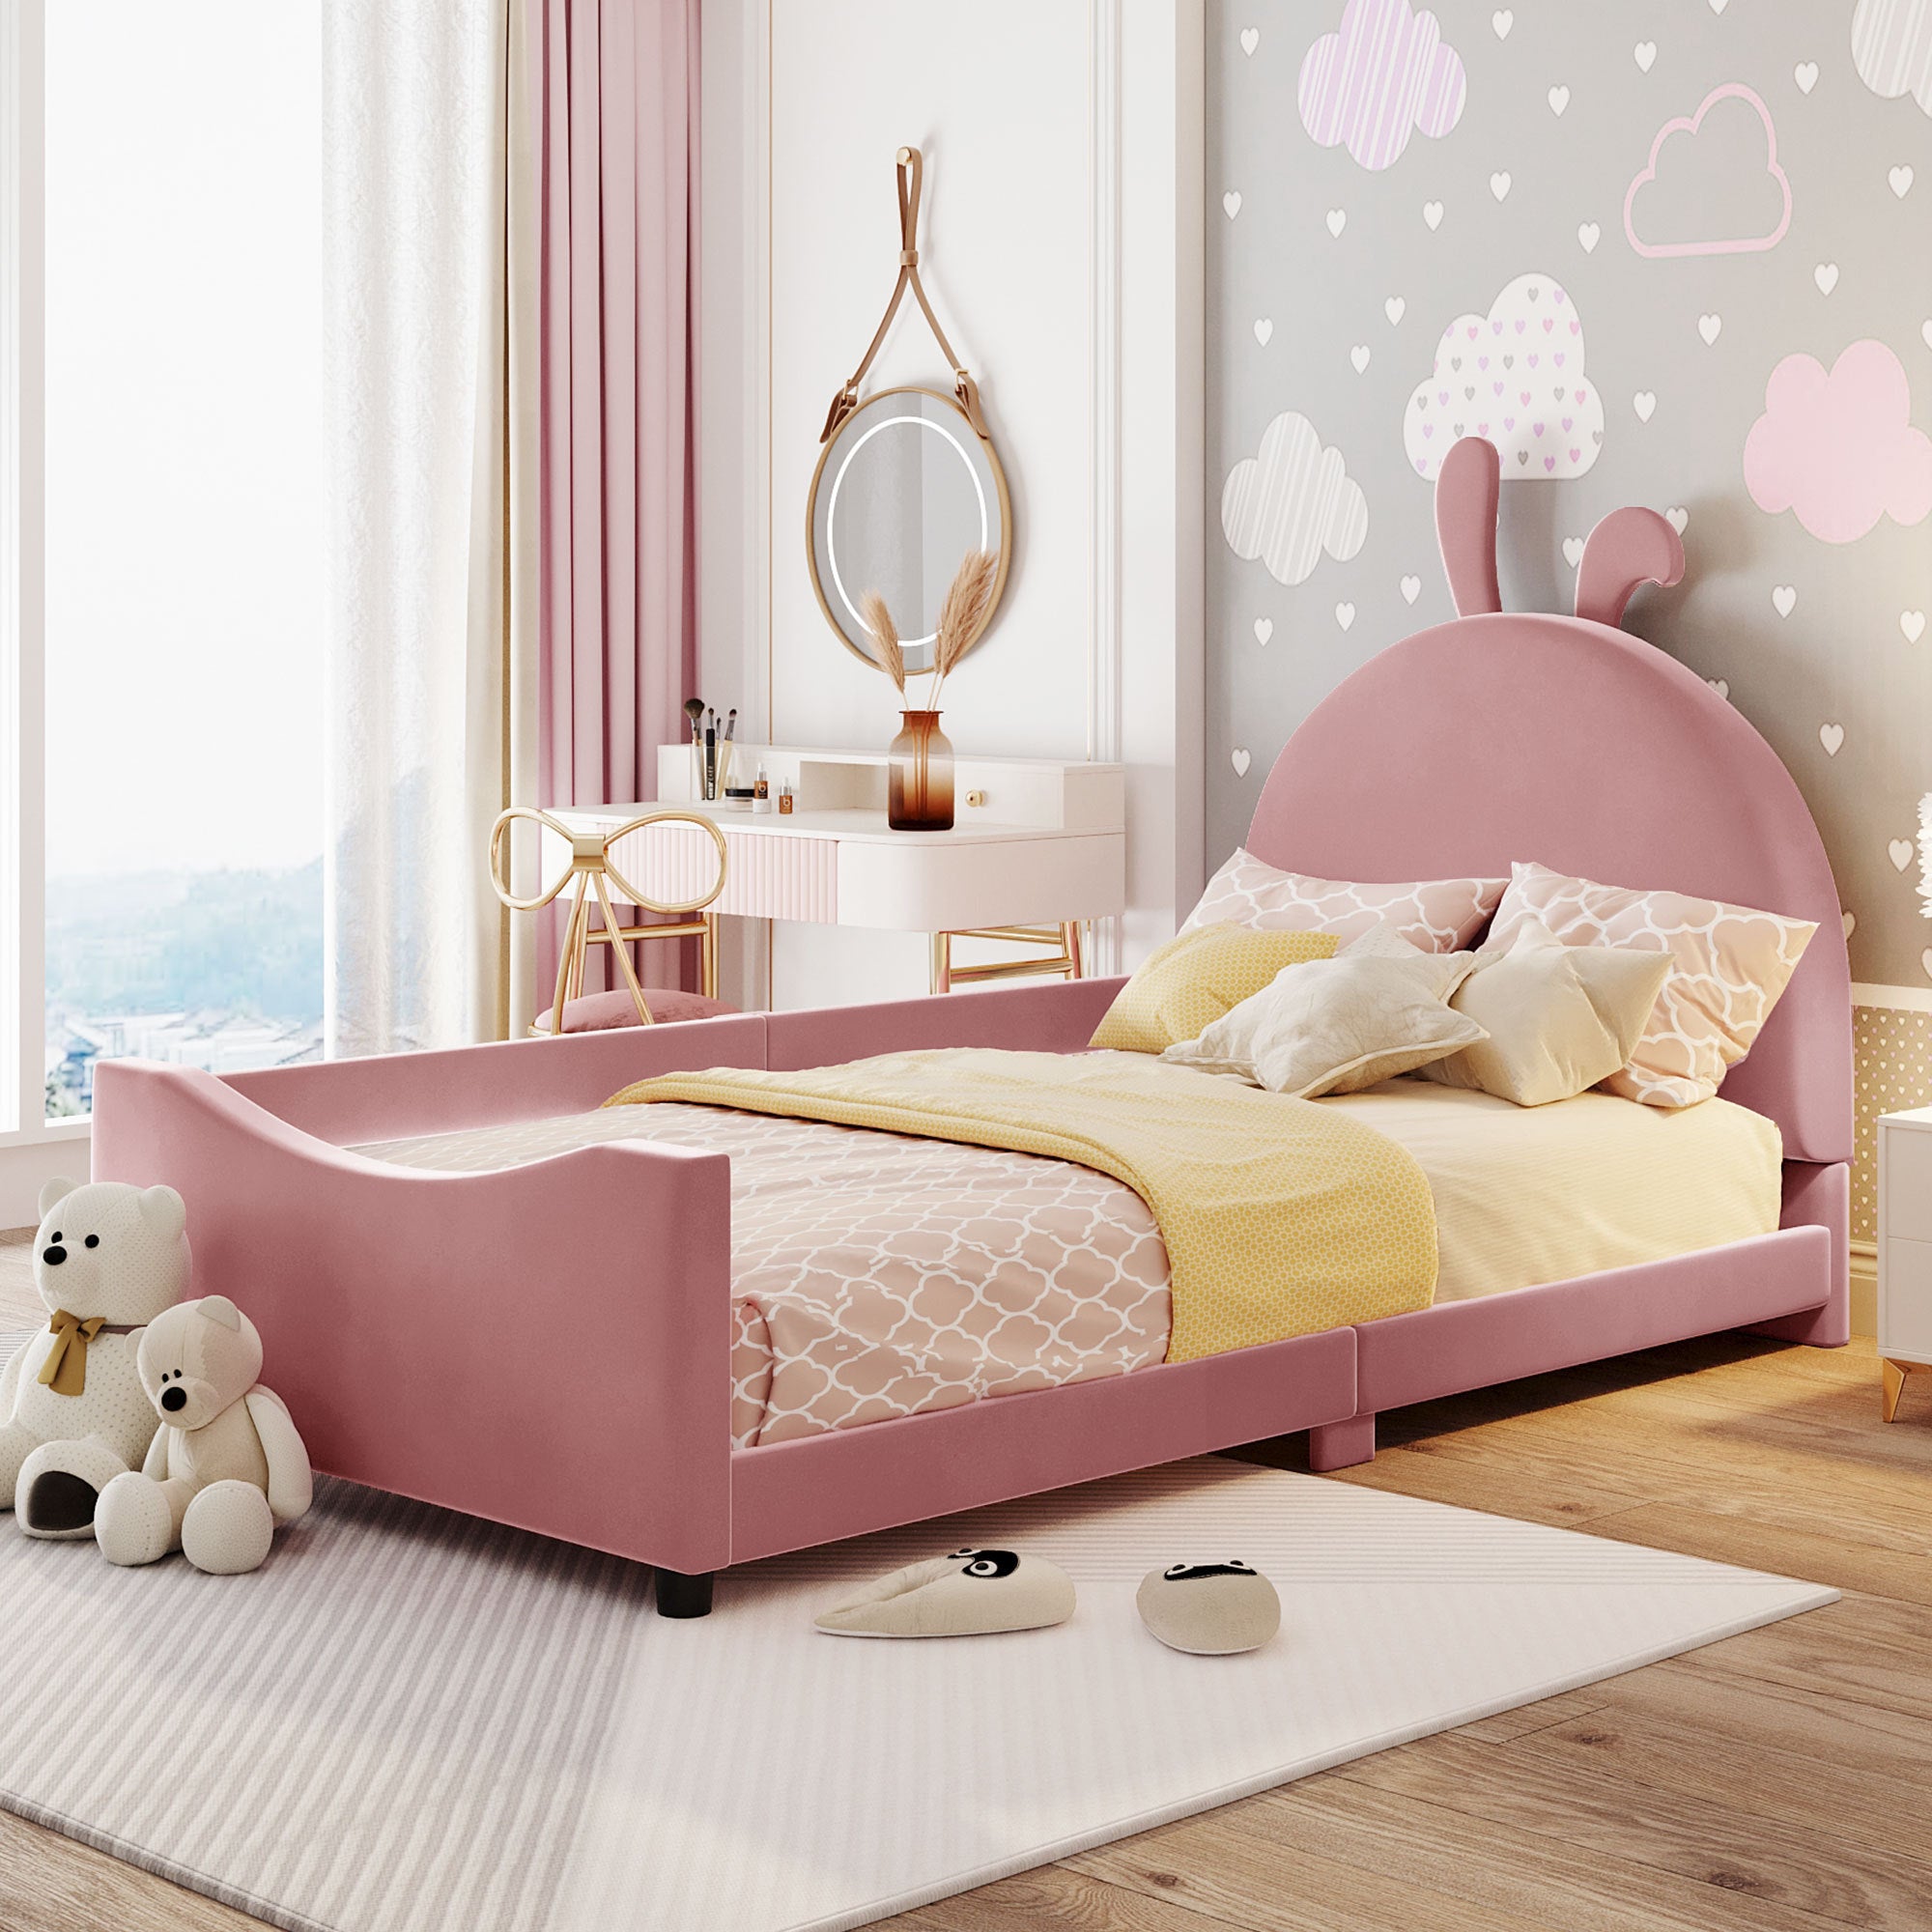 Twin Size Upholstered Daybed with Rabbit Ear Shaped pink-velvet